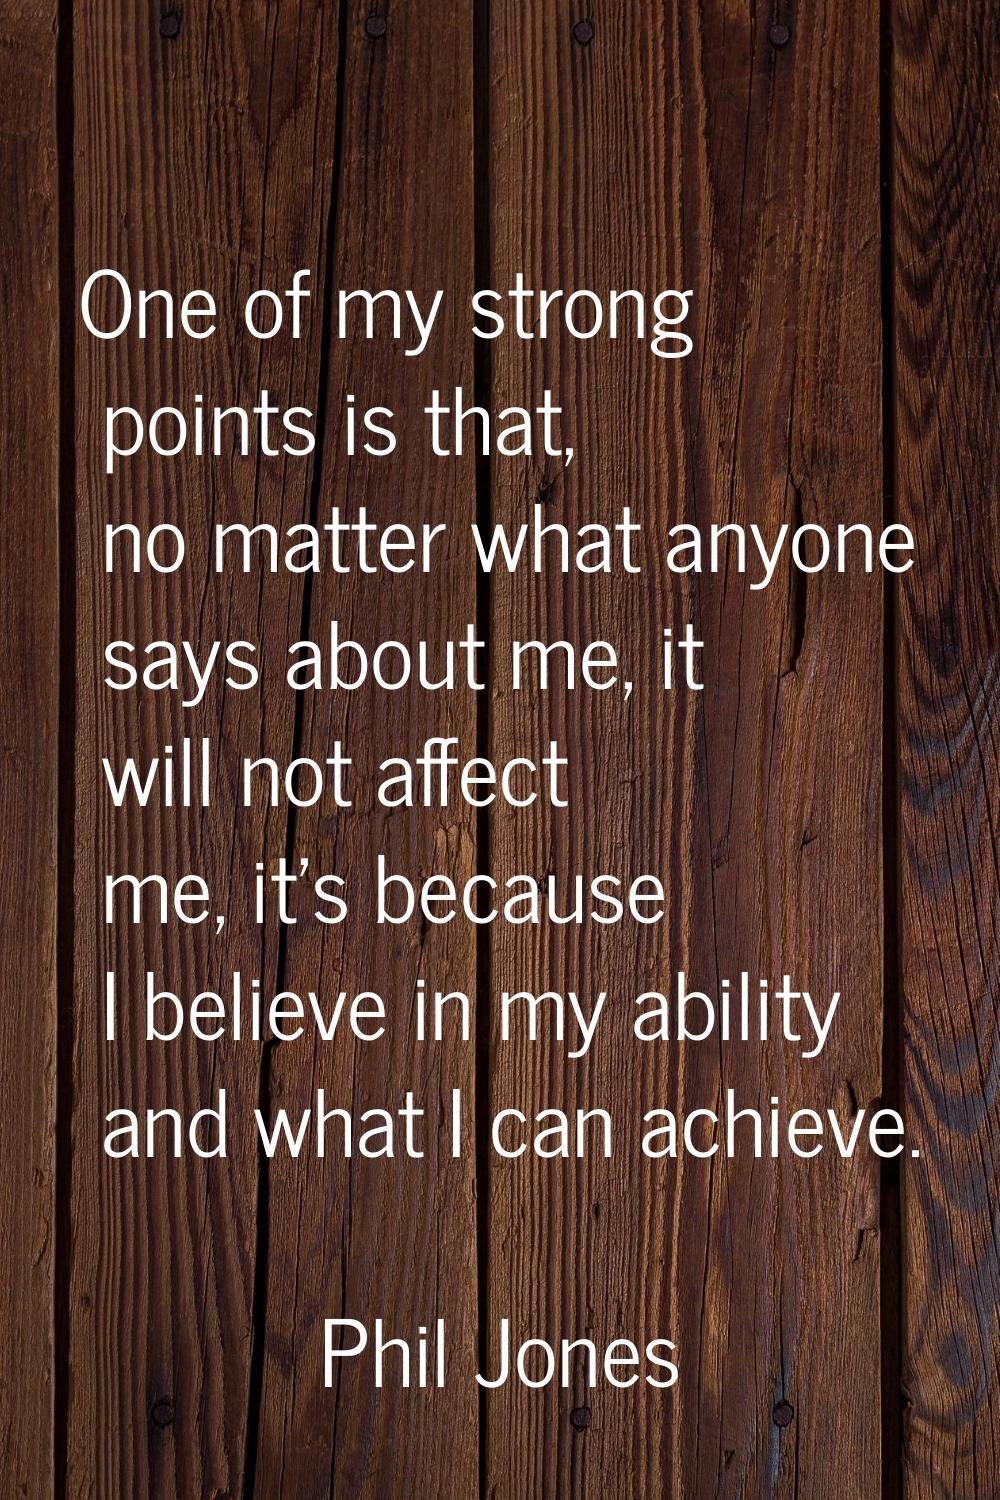 One of my strong points is that, no matter what anyone says about me, it will not affect me, it's b